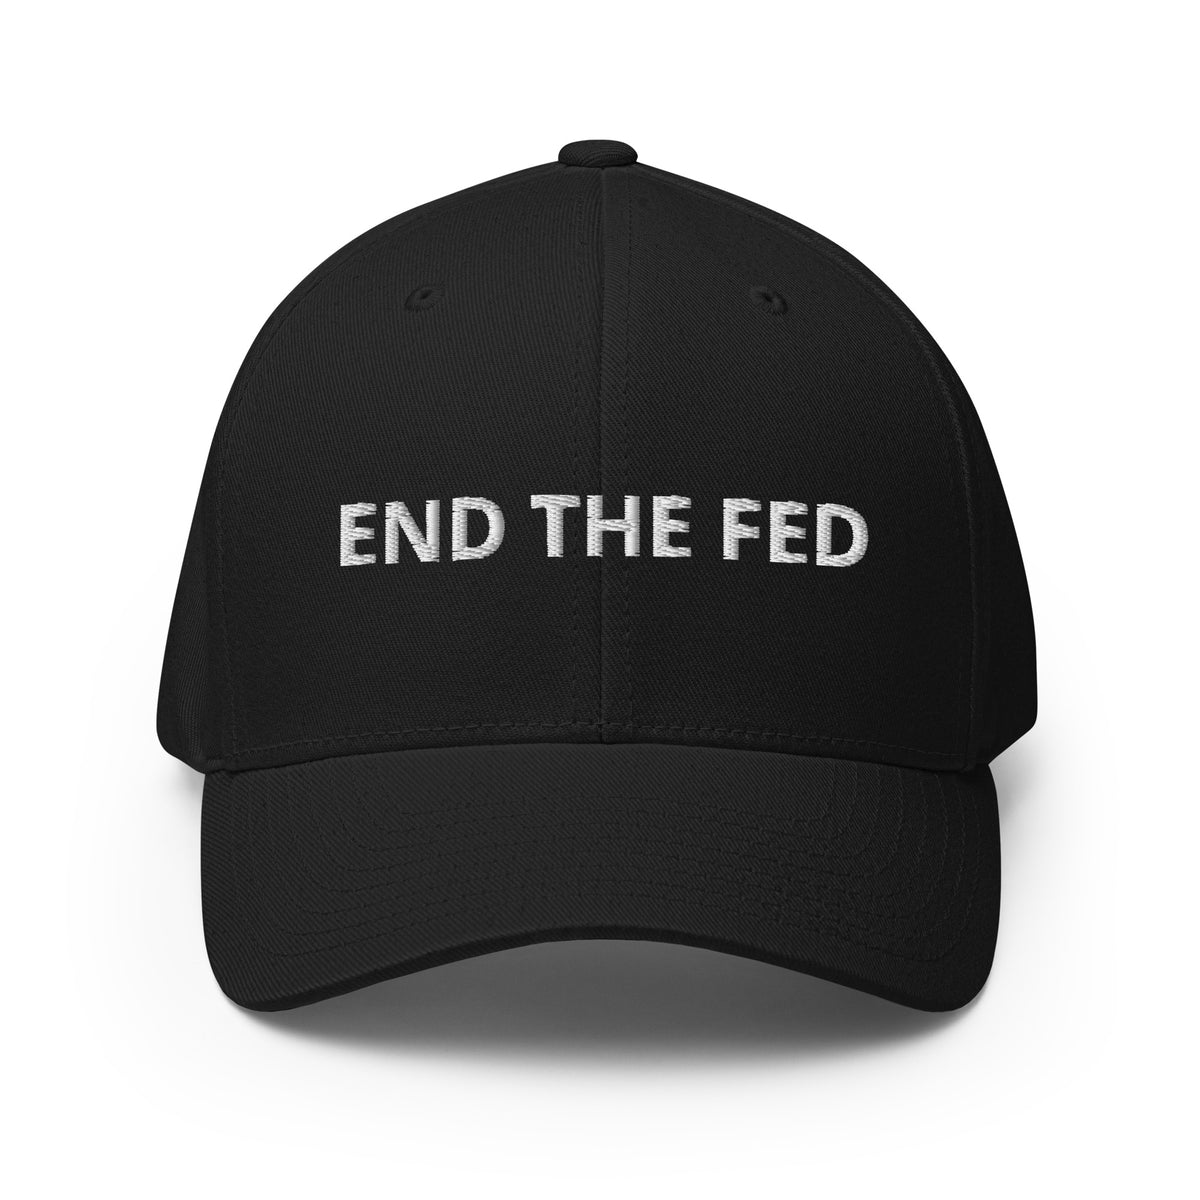 End The Fed (White Embroidery) Bitcoin Flexfit Hat - fomo21